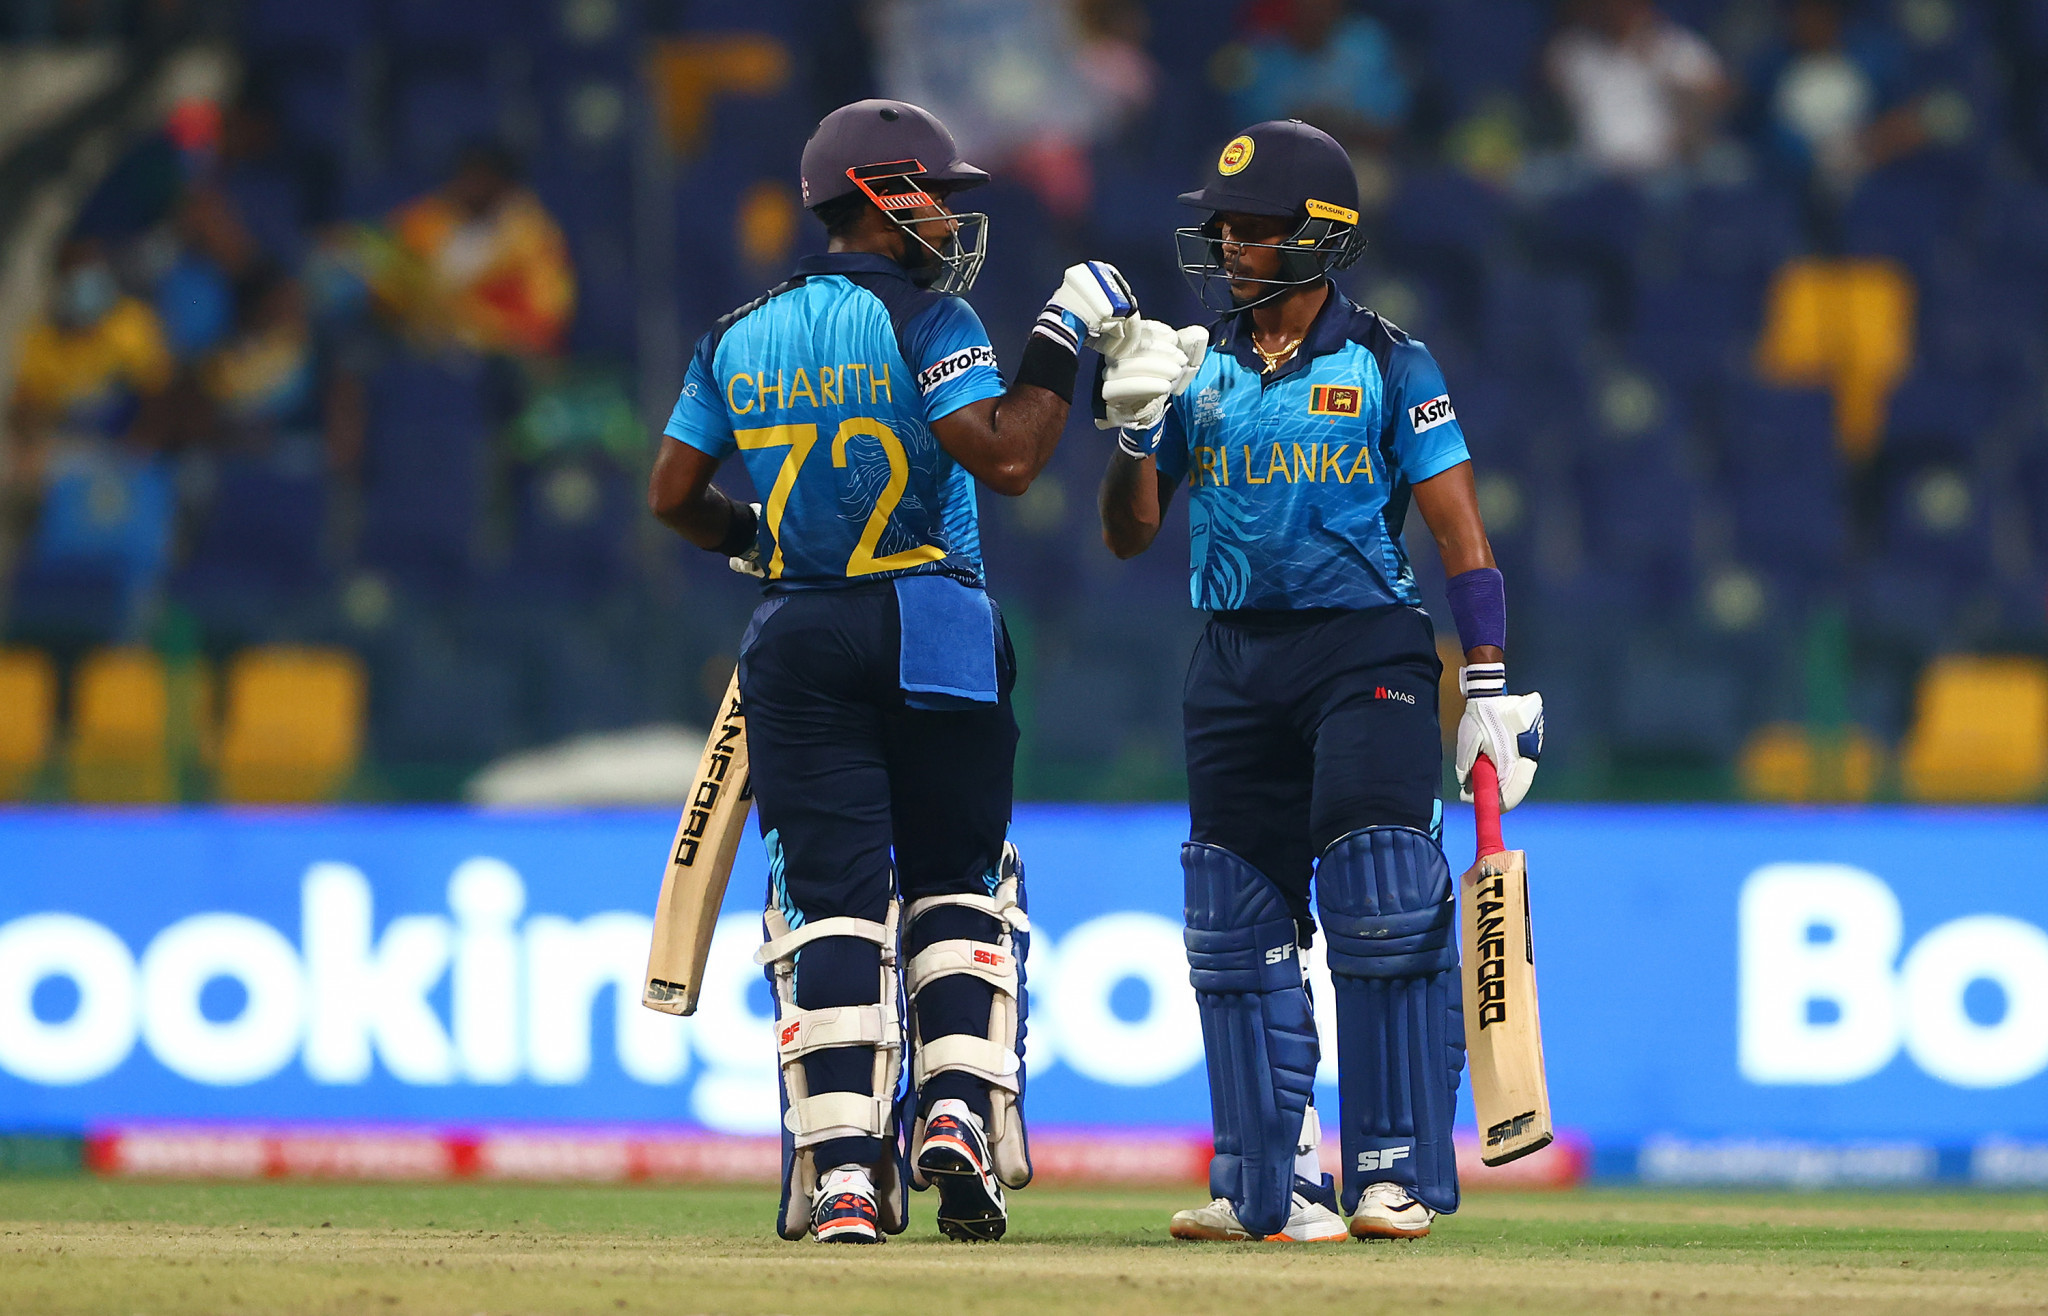 Charith Asalanka, left, and Pathum Nissaka 
scored 91 runs from 61 balls in a commanding partnership ©Getty Images